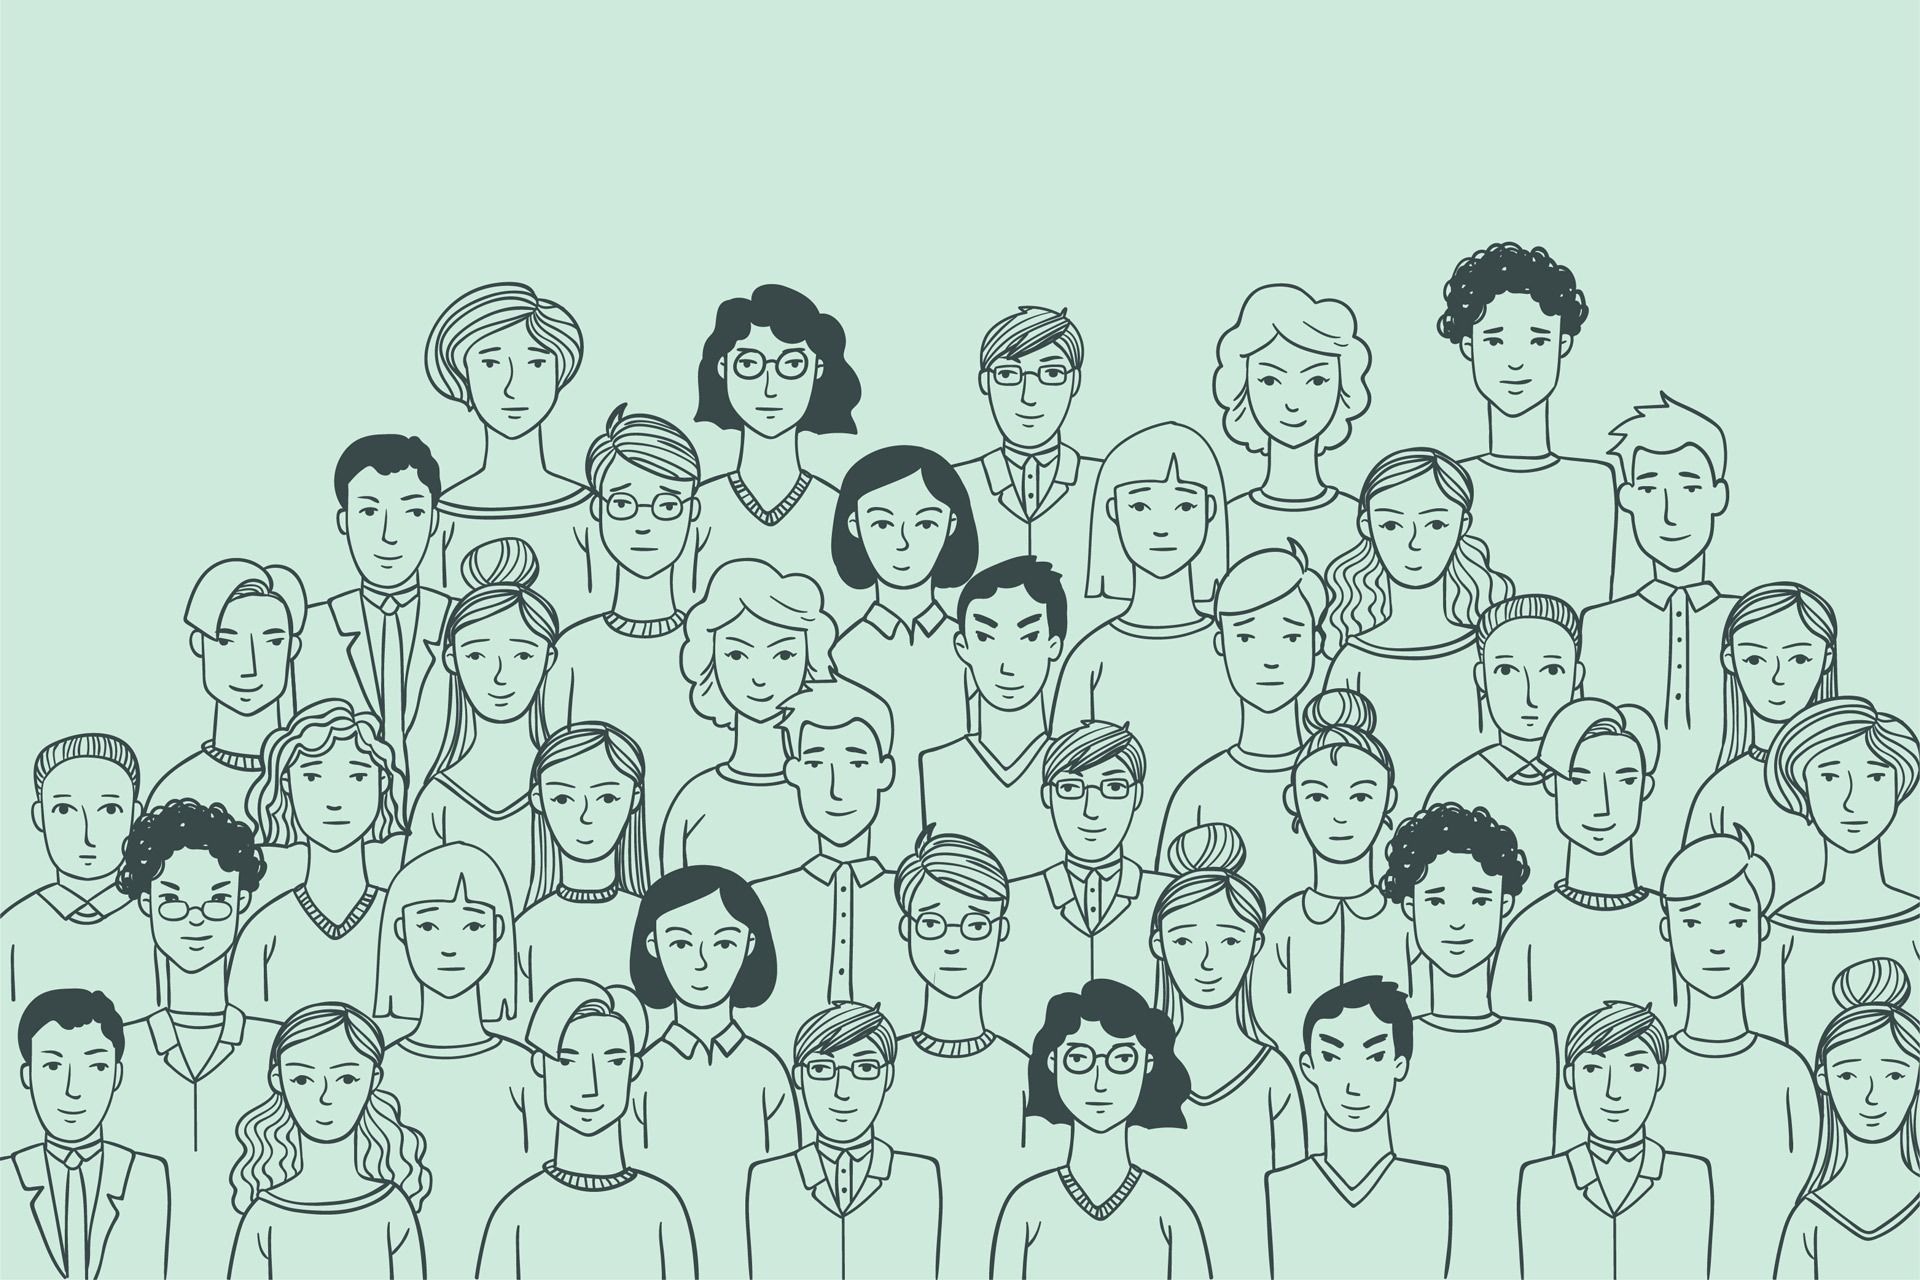 https://www.freepik.com/free-vector/people-sketches-background_1350847.htm#page=2&query=graphics%20citizens&position=27&from_view=search&track=ais